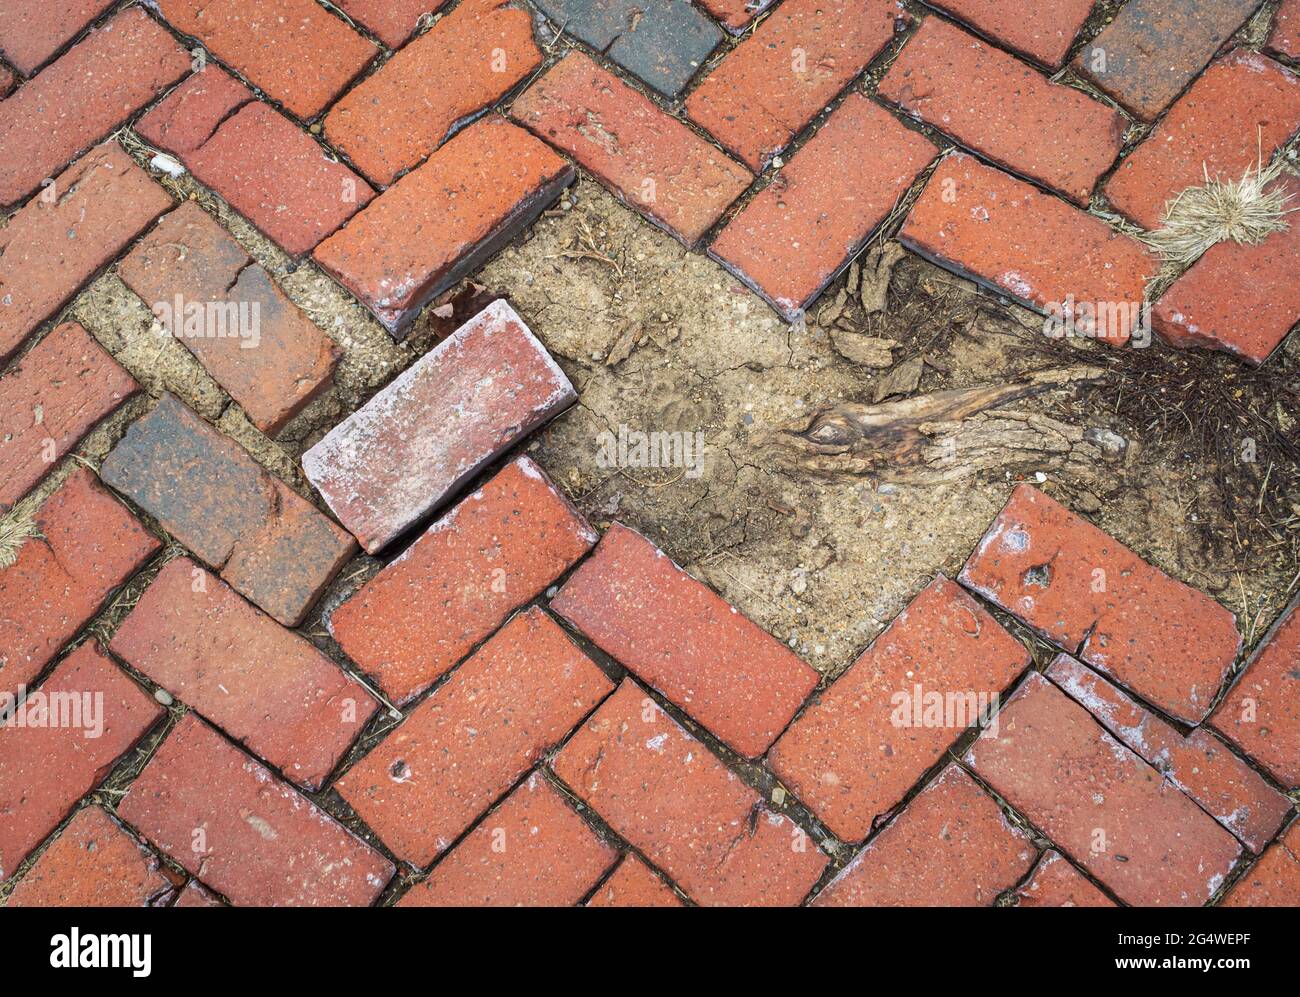 Damaged brick pavers that werre once in a herringbone pattern. tree root and dirt background texture, Columbus, Ohio. Stock Photo